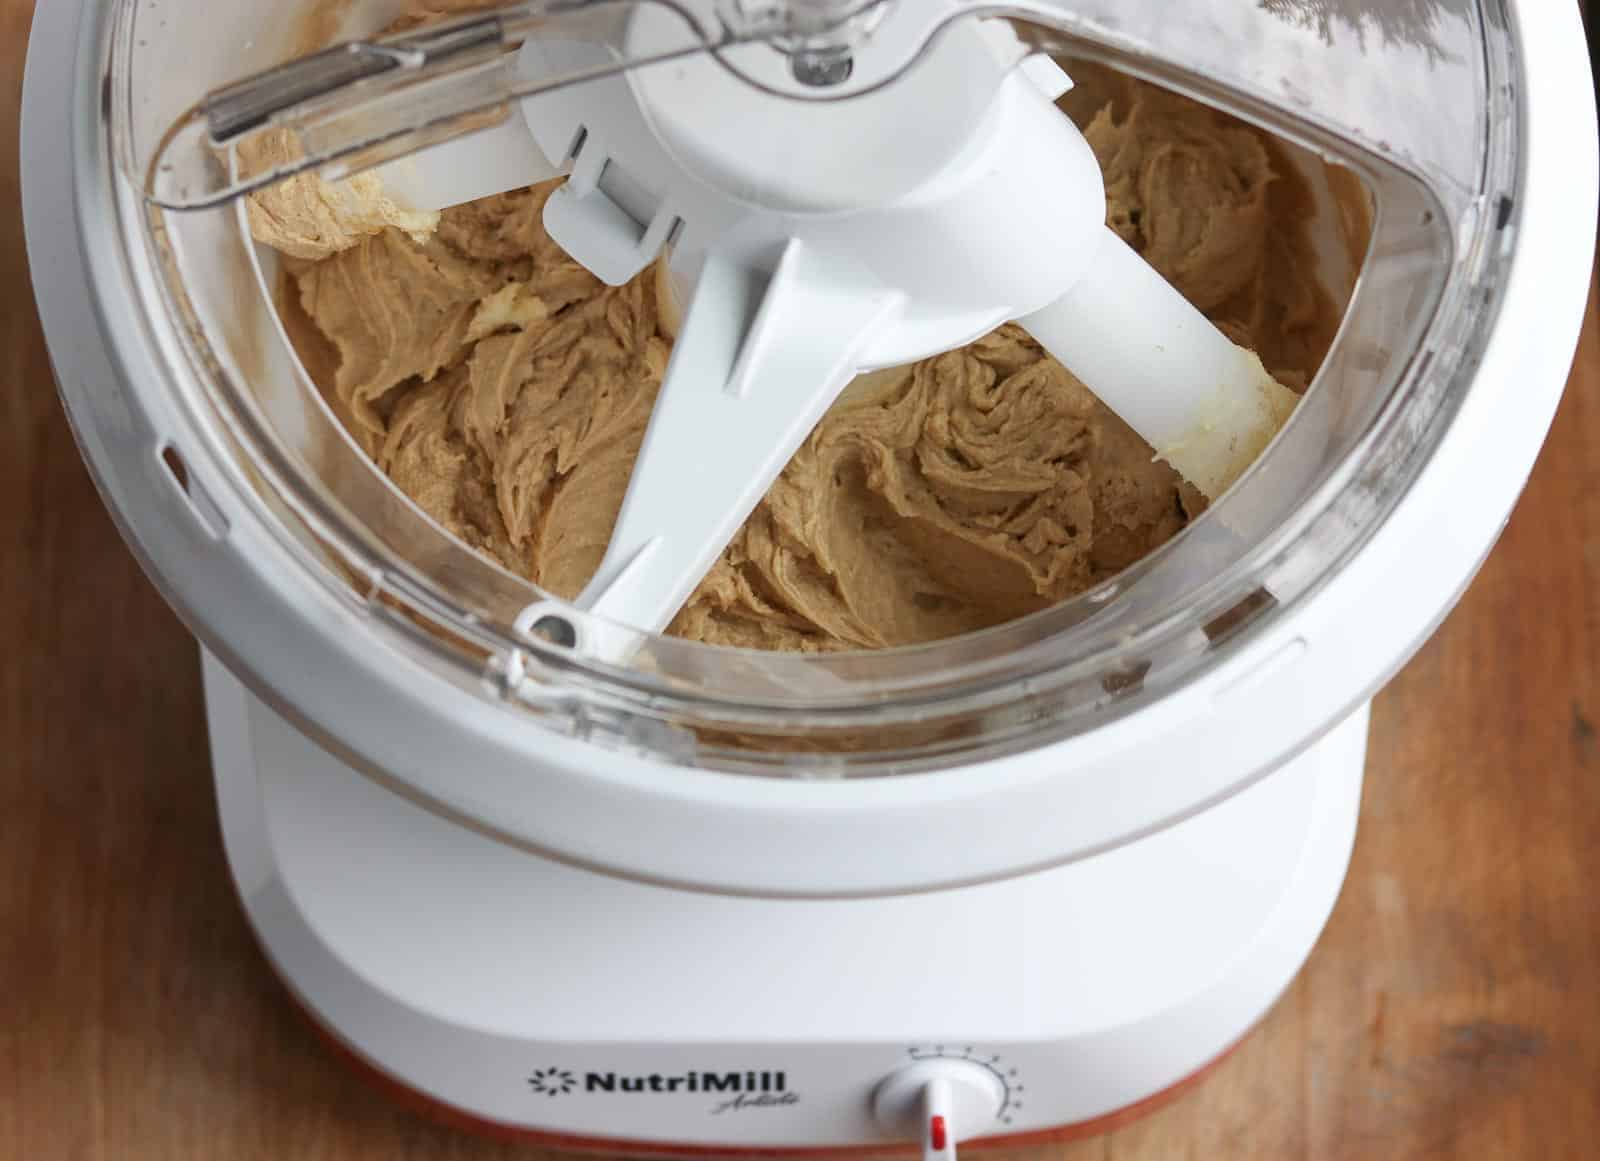 Creamed mixture in the Nutrimill Artiste Mixer from Gourmet Done Skinny